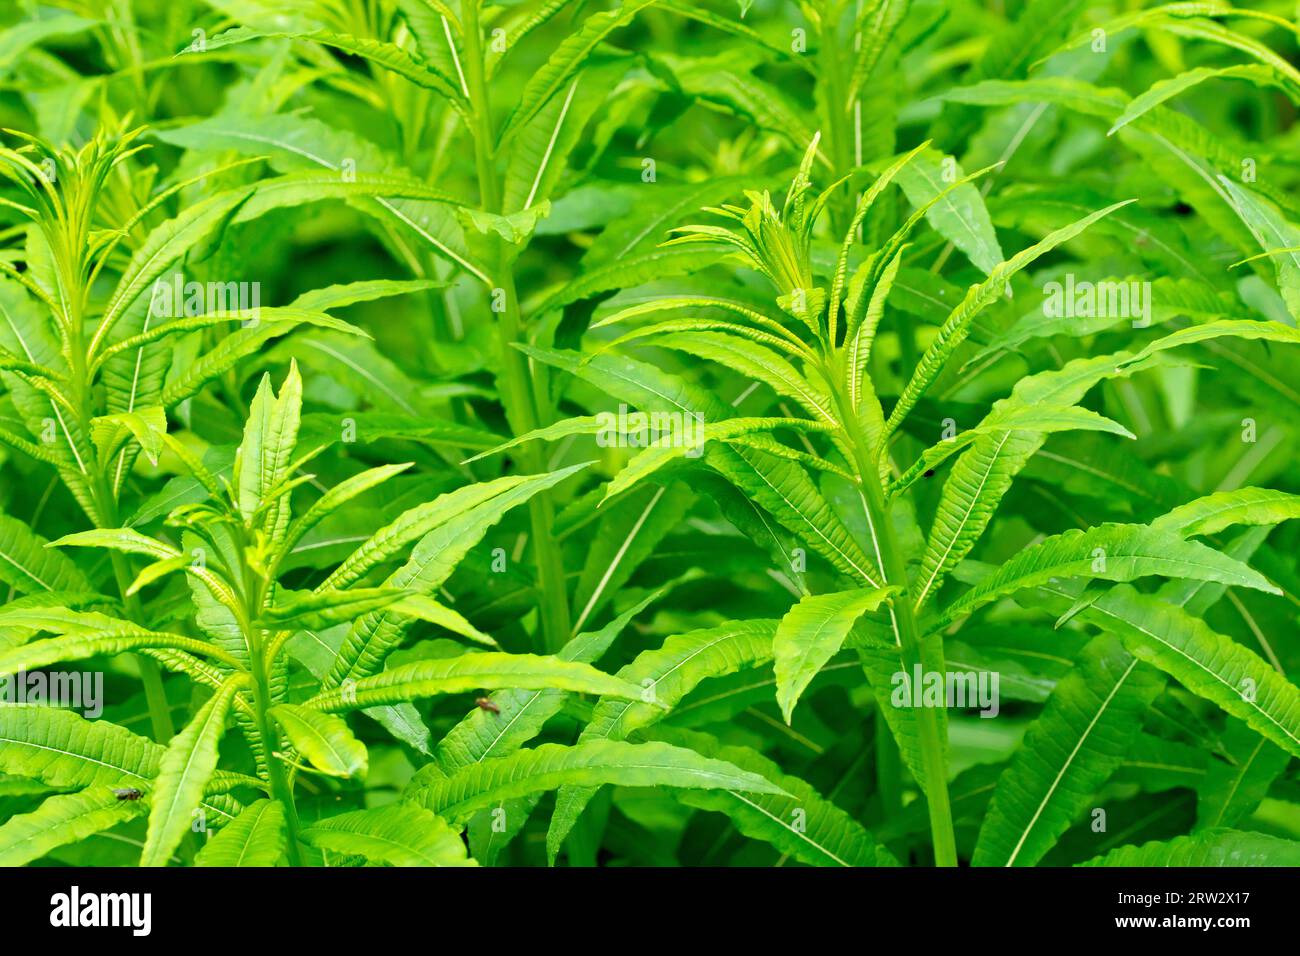 Rosebay Willowherb or Fireweed (epilobium angustifolium or chamerion angustifolium), close up of showing the leaves of the young plants in the spring. Stock Photo